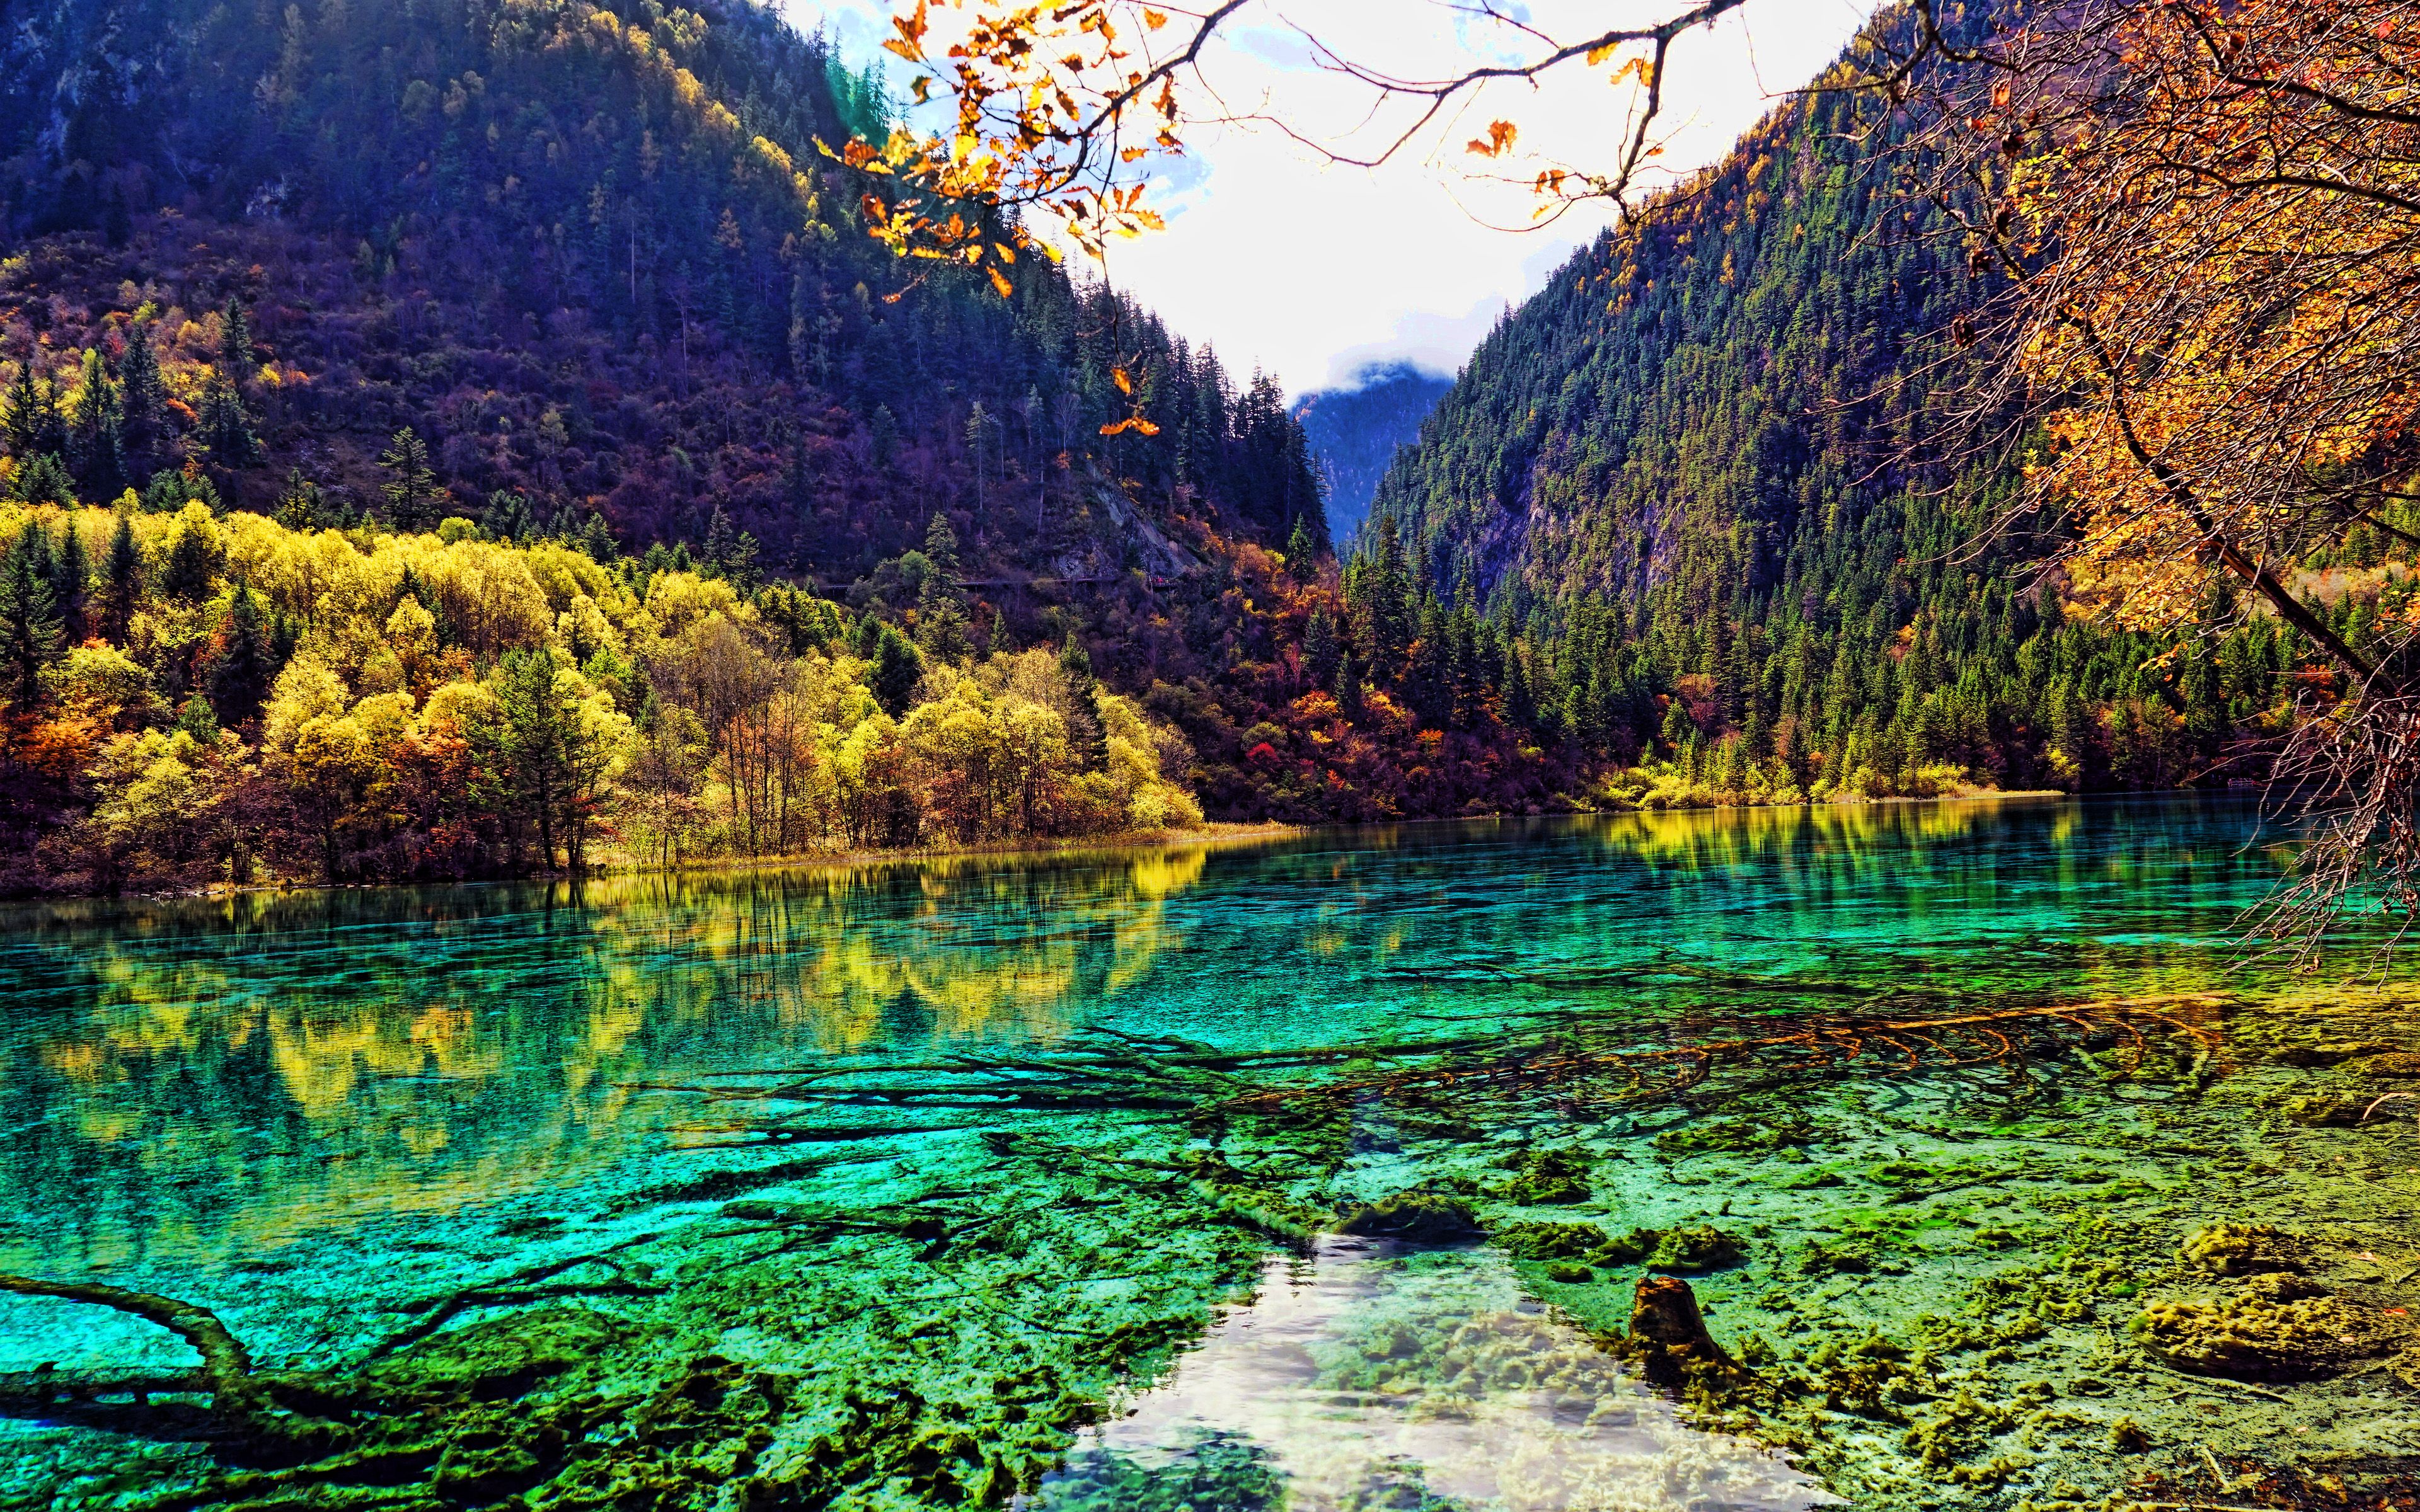 Download wallpaper 4k, Jiuzhaigou National Park, beautiful nature, autumn, blue lake, forest, China, Chinese nature, Asia, Valley of Nine Villages for desktop with resolution 3840x2400. High Quality HD picture wallpaper